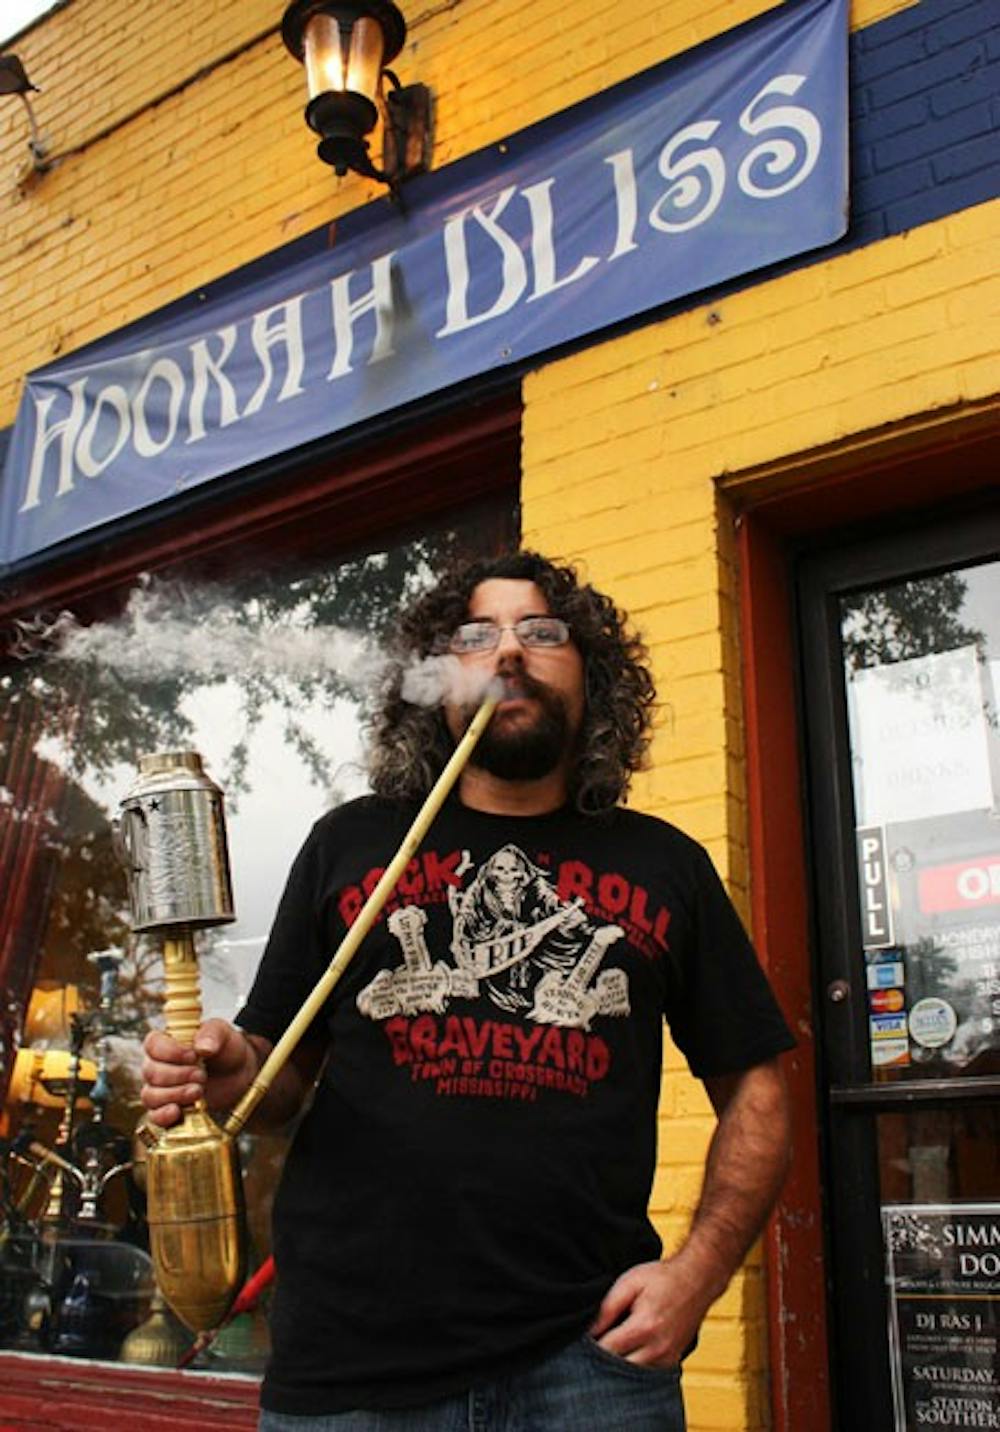 Adam Bliss first opened Hookah Bliss as a bar and will have to make changes to stay open. DTH/Daixi Xu